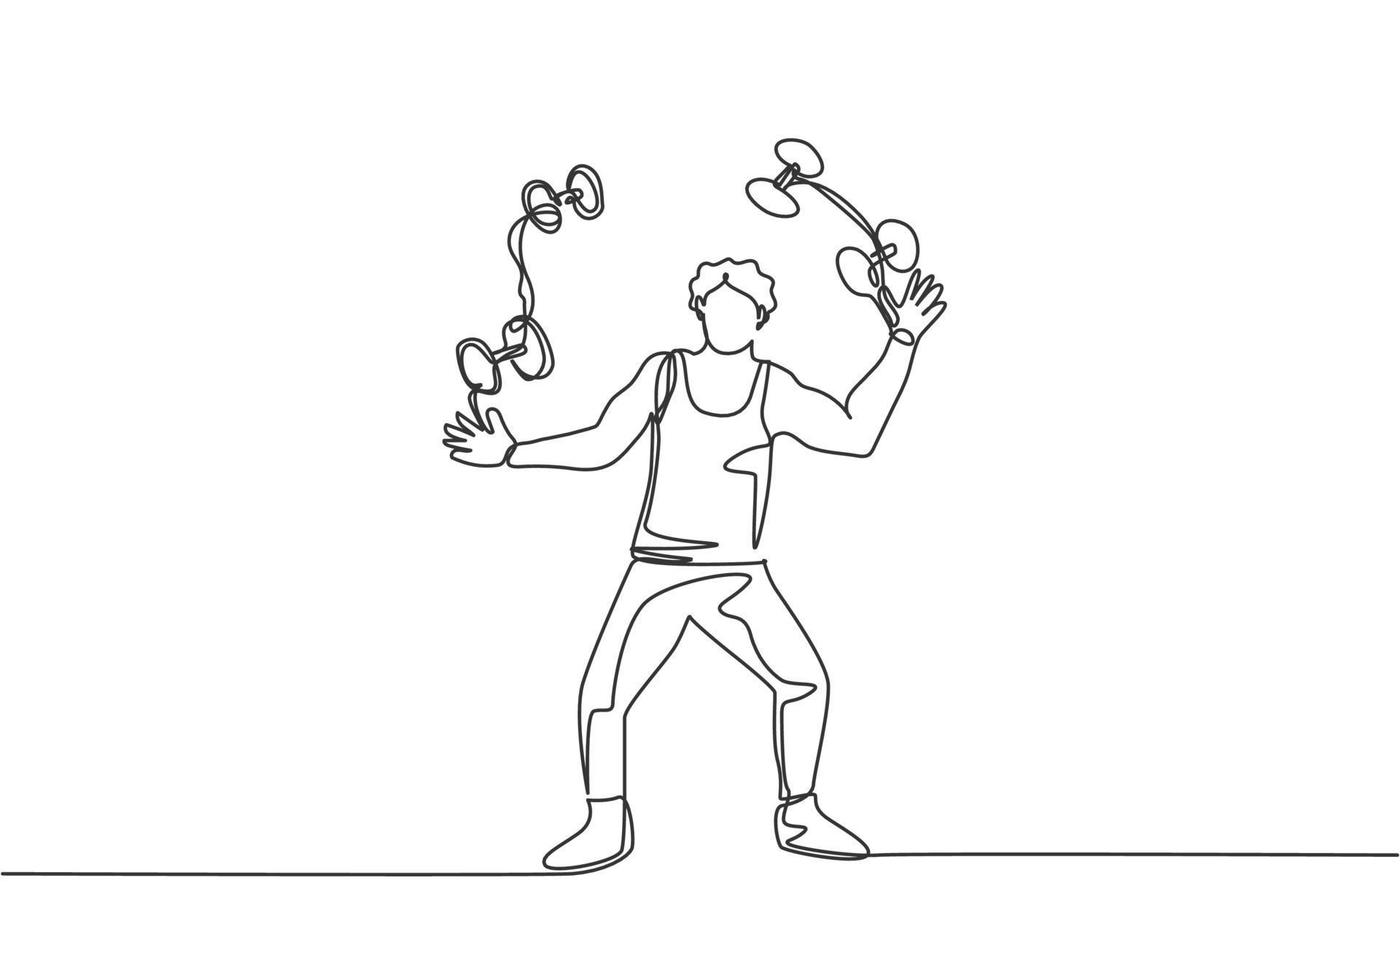 Single one line drawing an acrobat juggling small dumbbells. This game requires dexterity, concentration, and constant practice. Modern continuous line draw design graphic vector illustration.